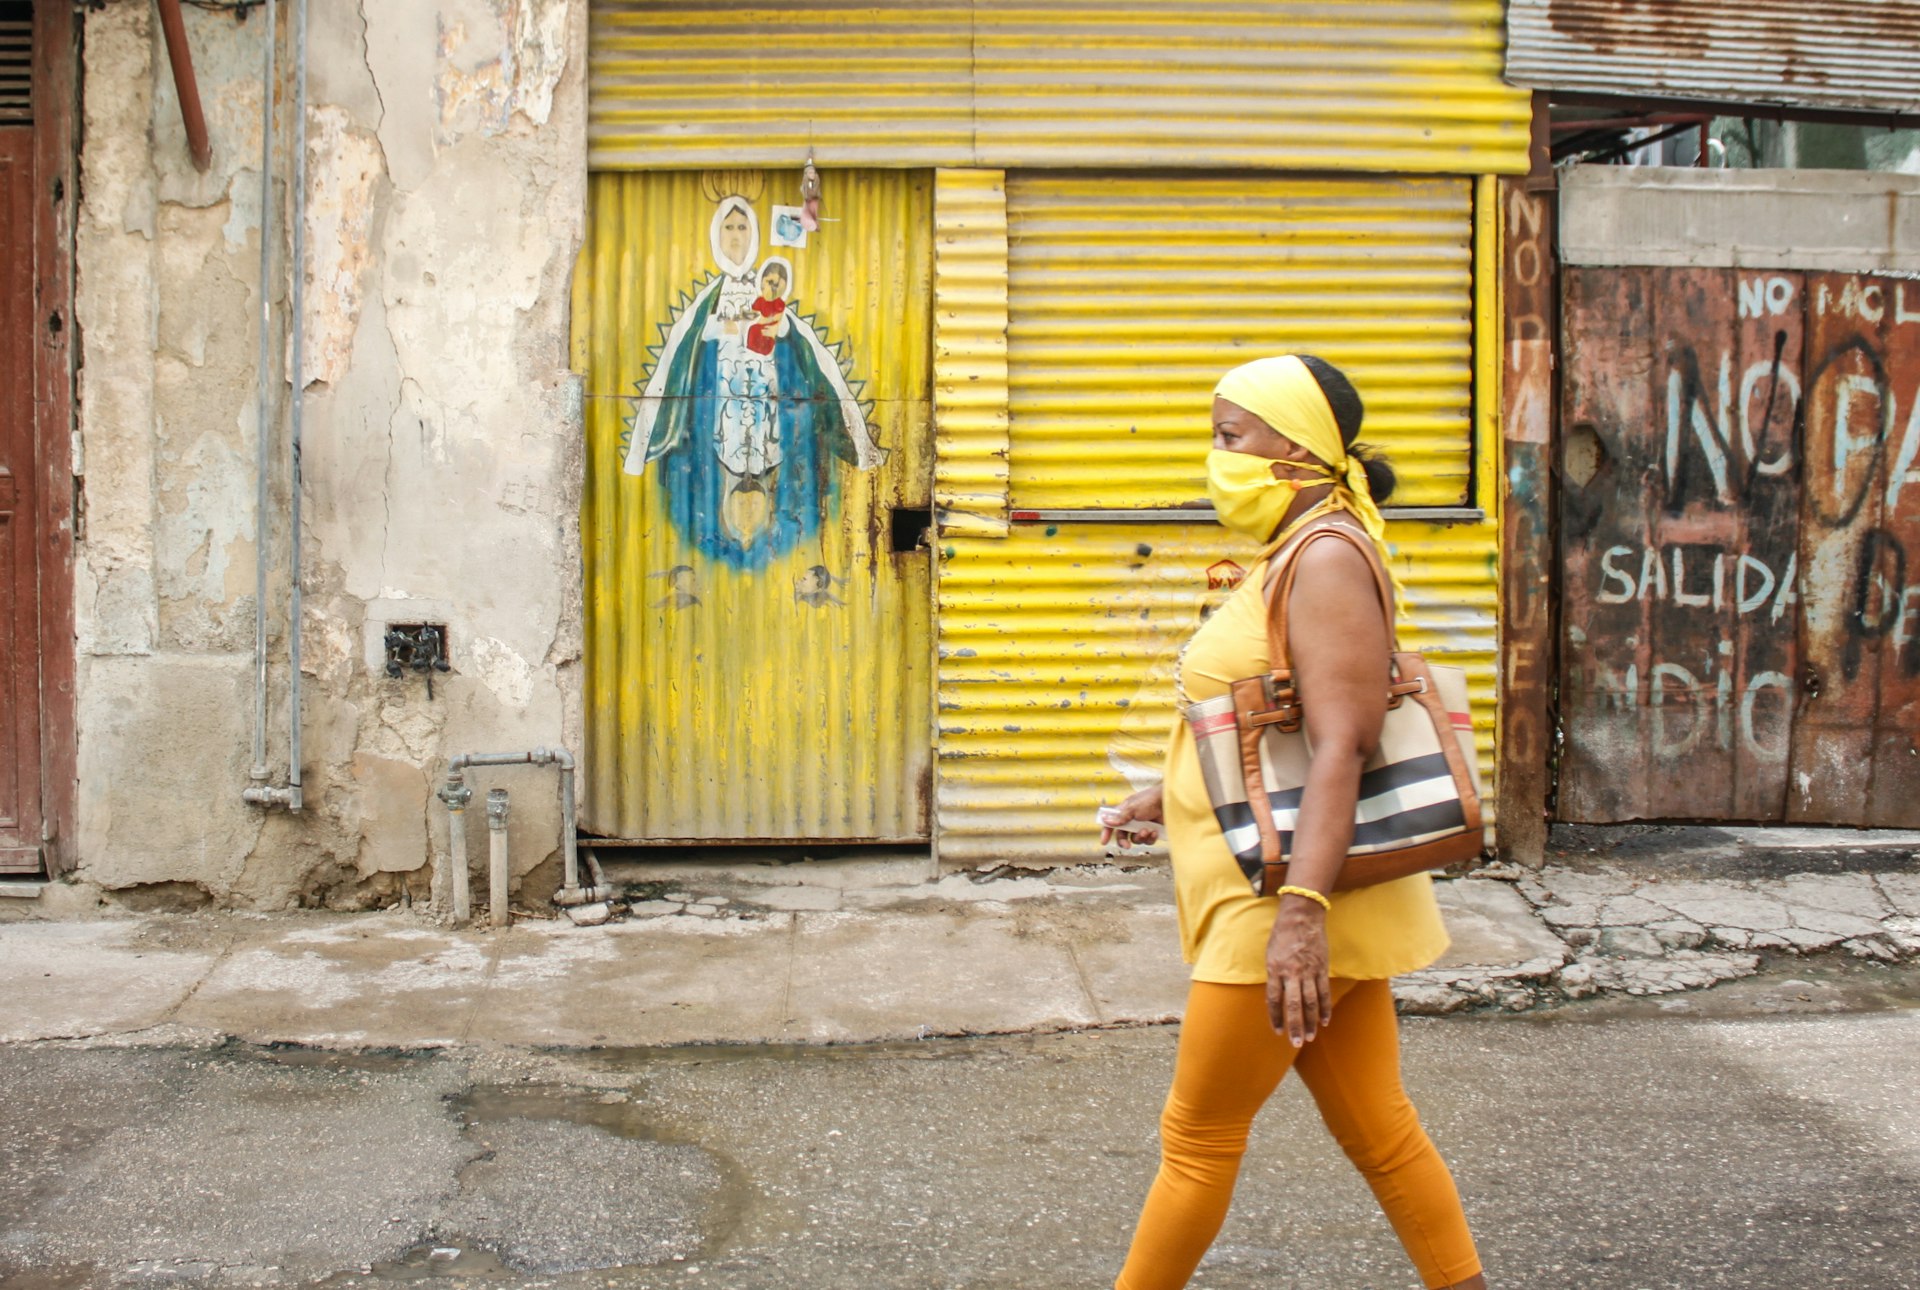 A woman in a yellow outfit with matching mask walks in front of a yellow storefront with street art in Havana